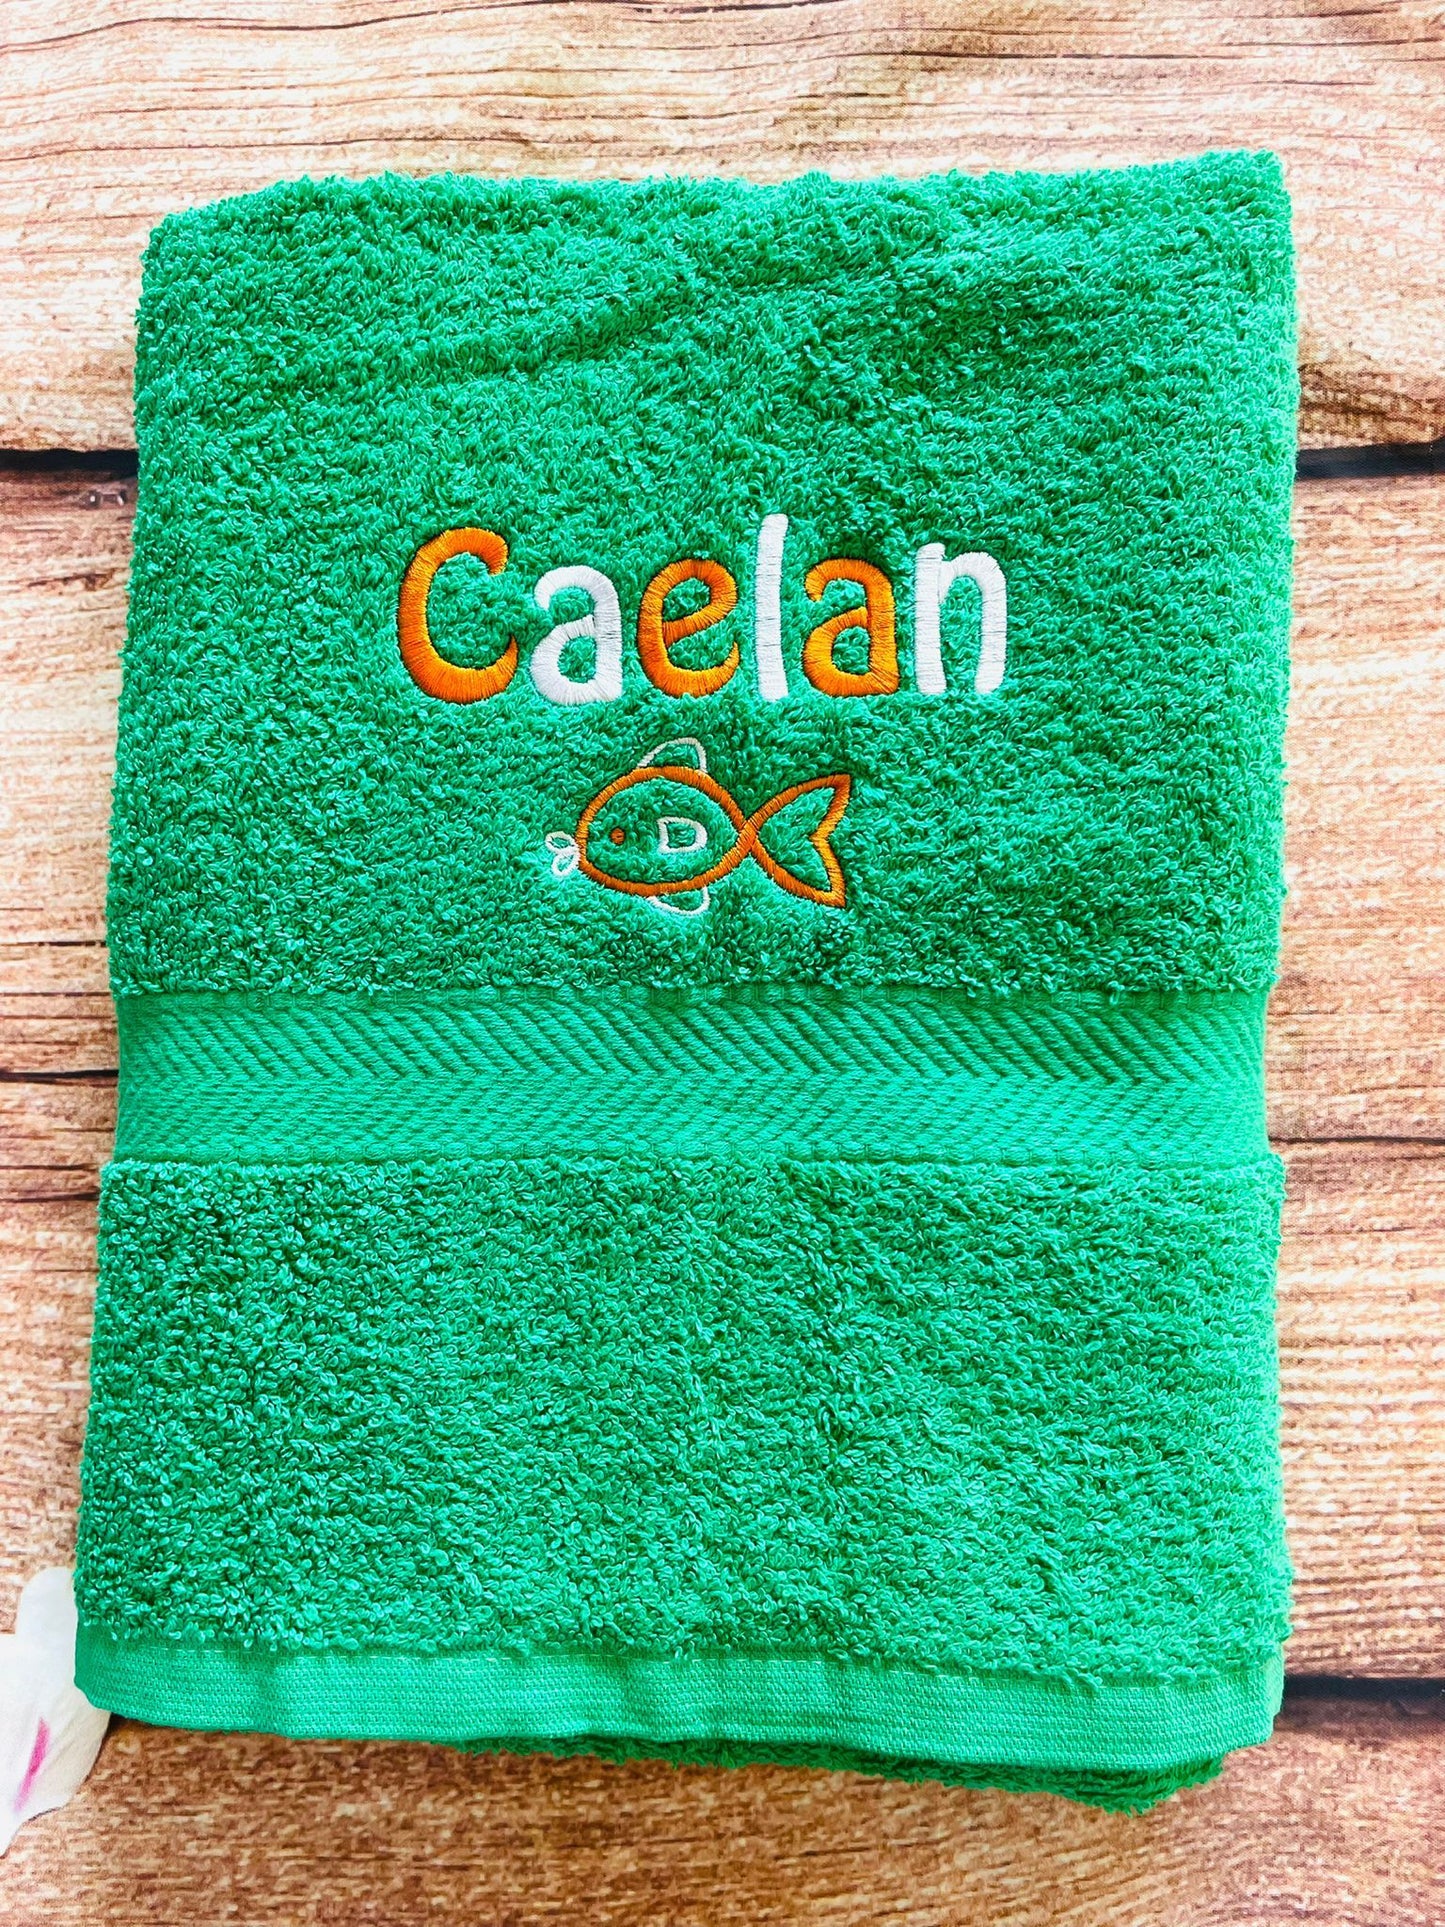 Embroidered Personalised Swimming or Sports Towel.  Ideal kids gift // Fish